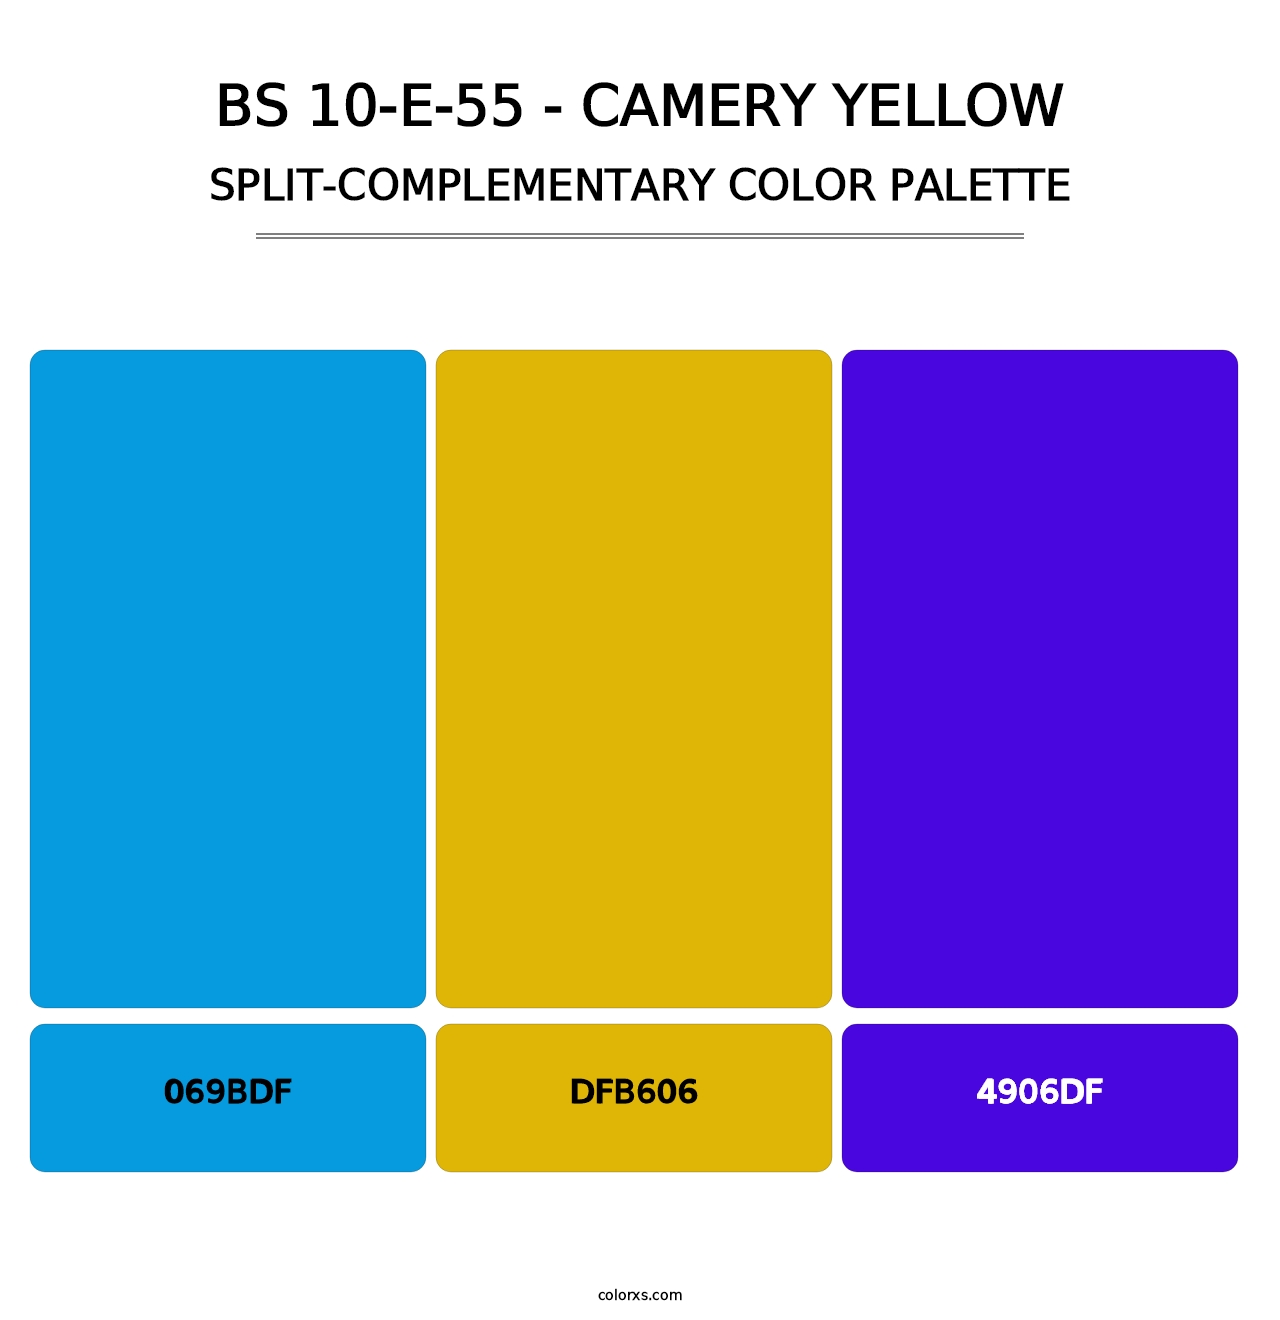 BS 10-E-55 - Camery Yellow - Split-Complementary Color Palette